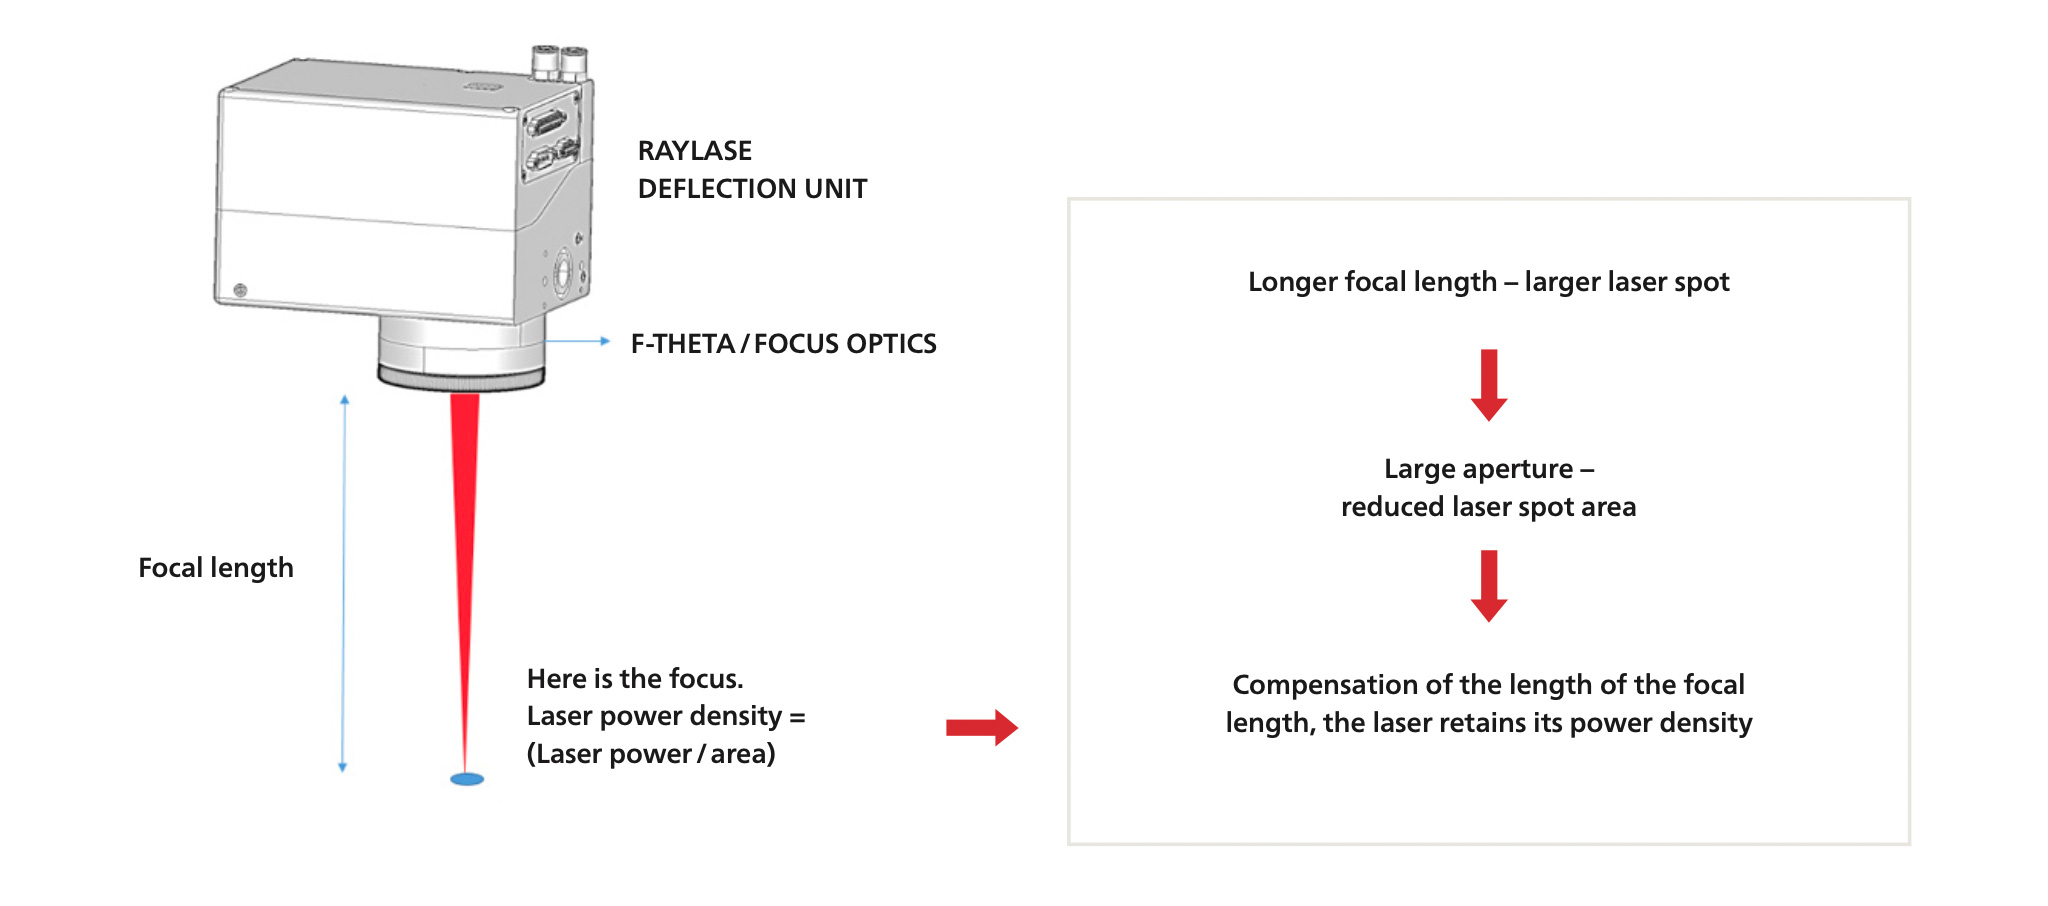 Graphic RAYLASE deflection unit with explanation